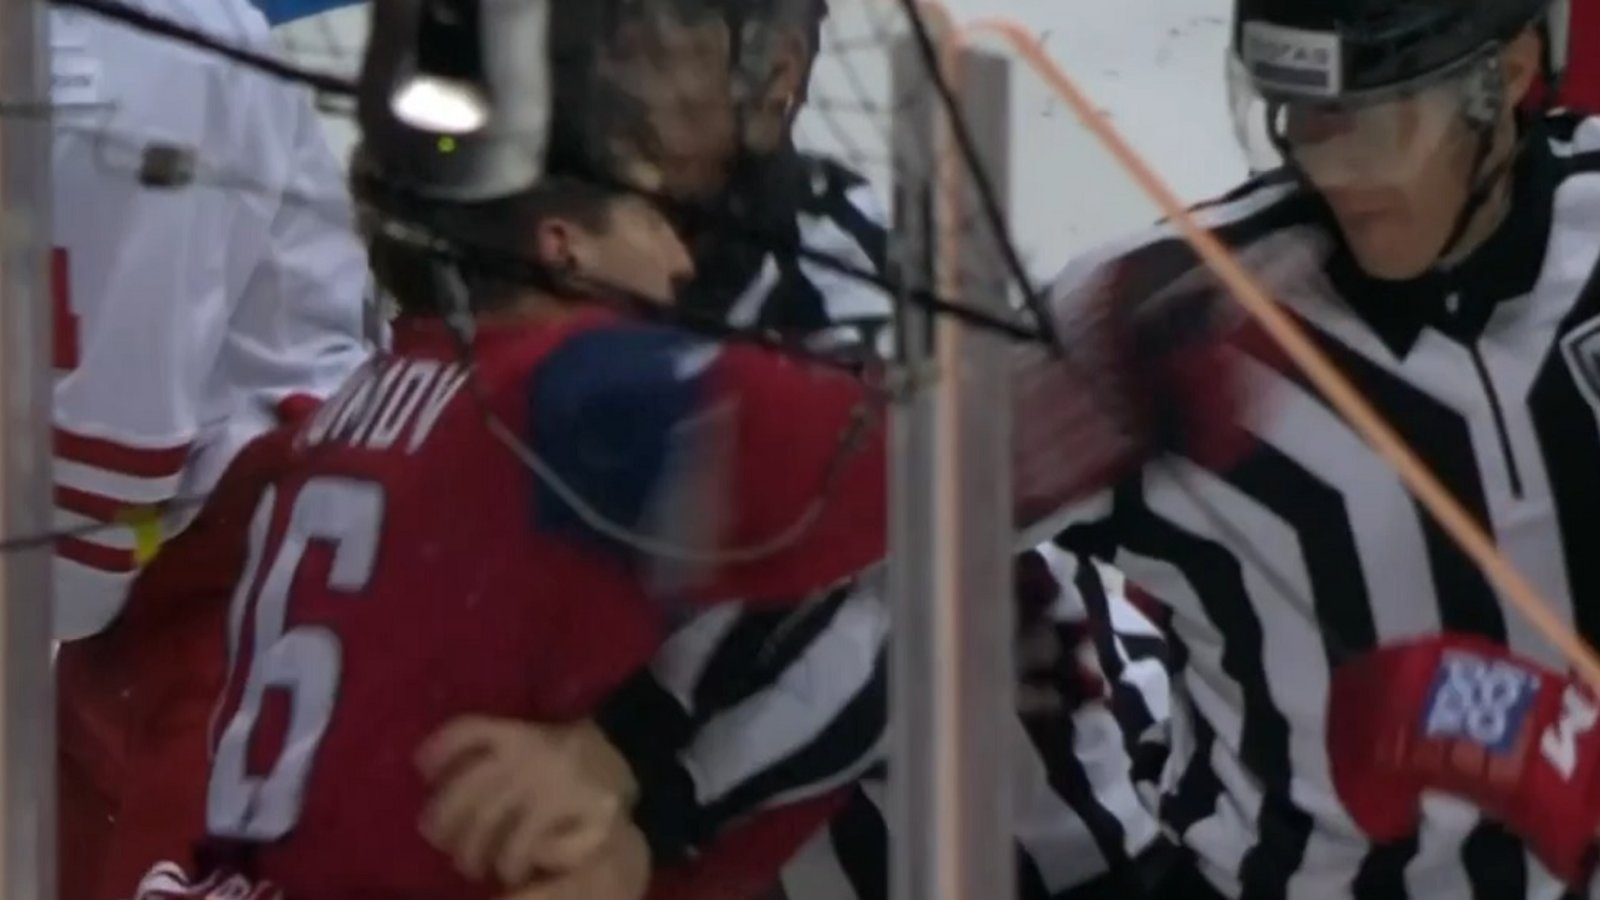 NHL prospect punches referee in the face after a nasty hit to the head.